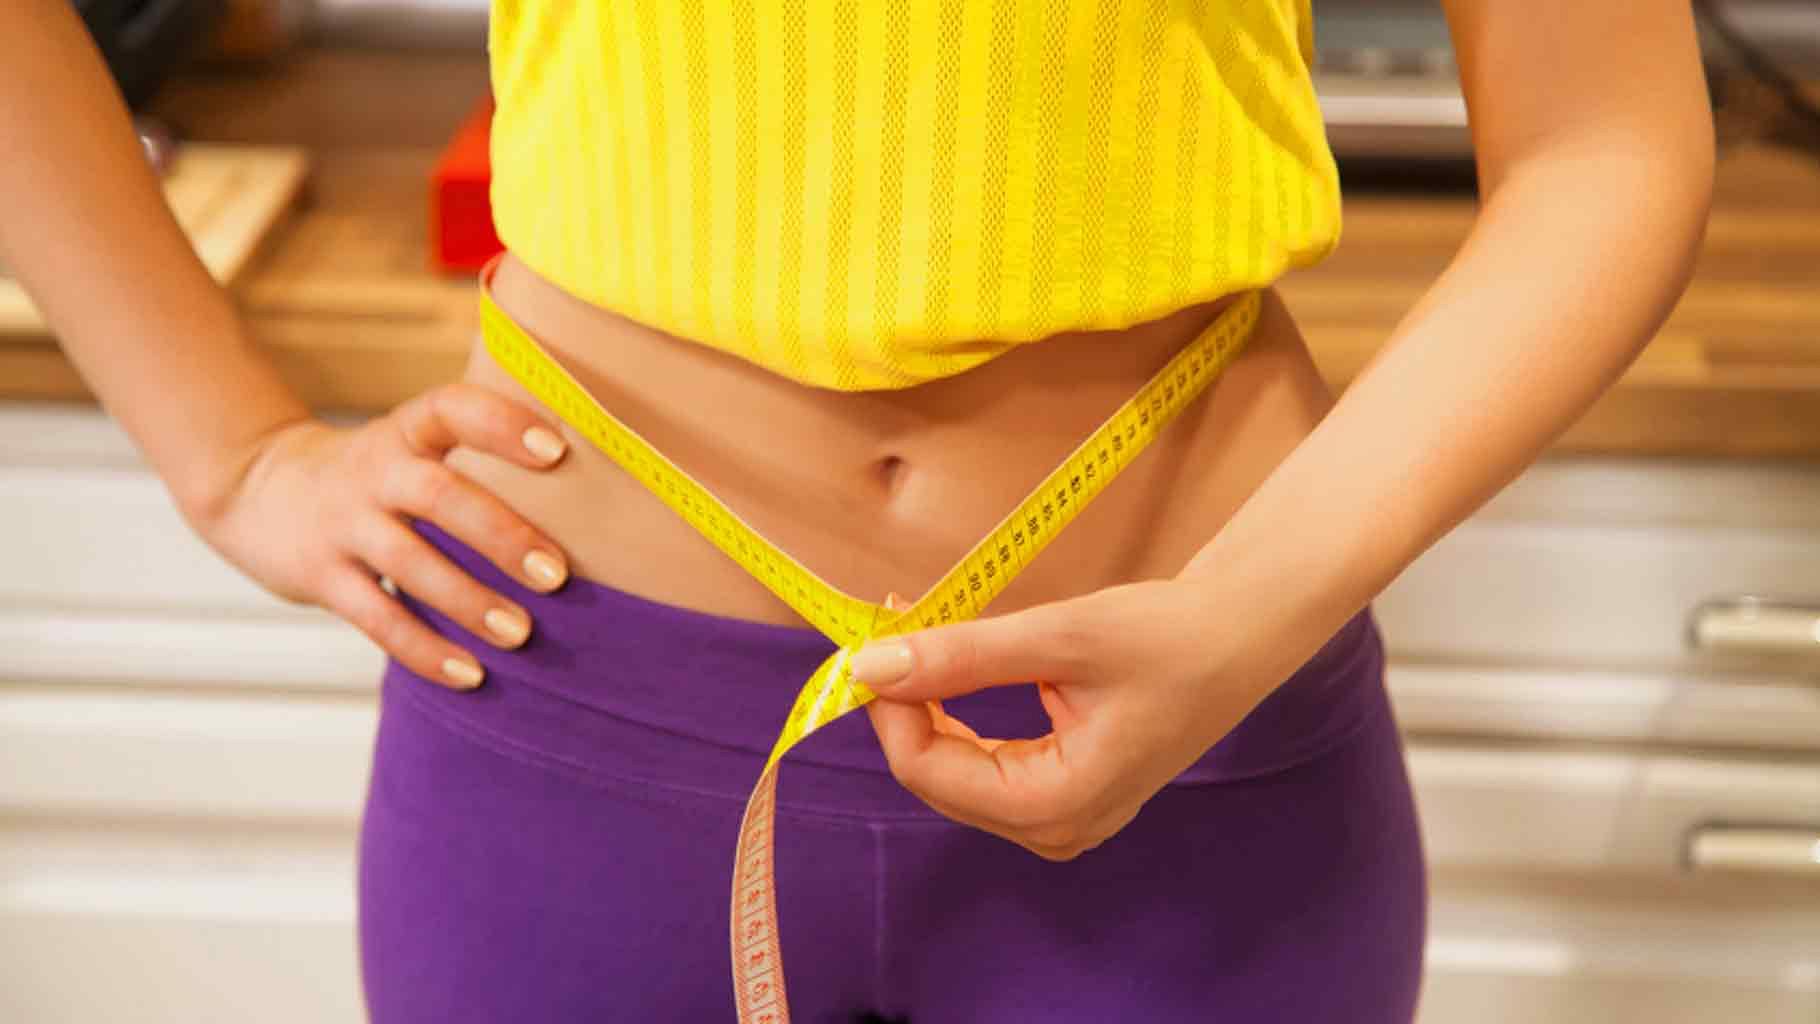 Getting the picture perfect waistline is not easy, whoever tells you otherwise is lying - but follow our simple strategies to lose weight and keep it off for good (Photo: iStock)